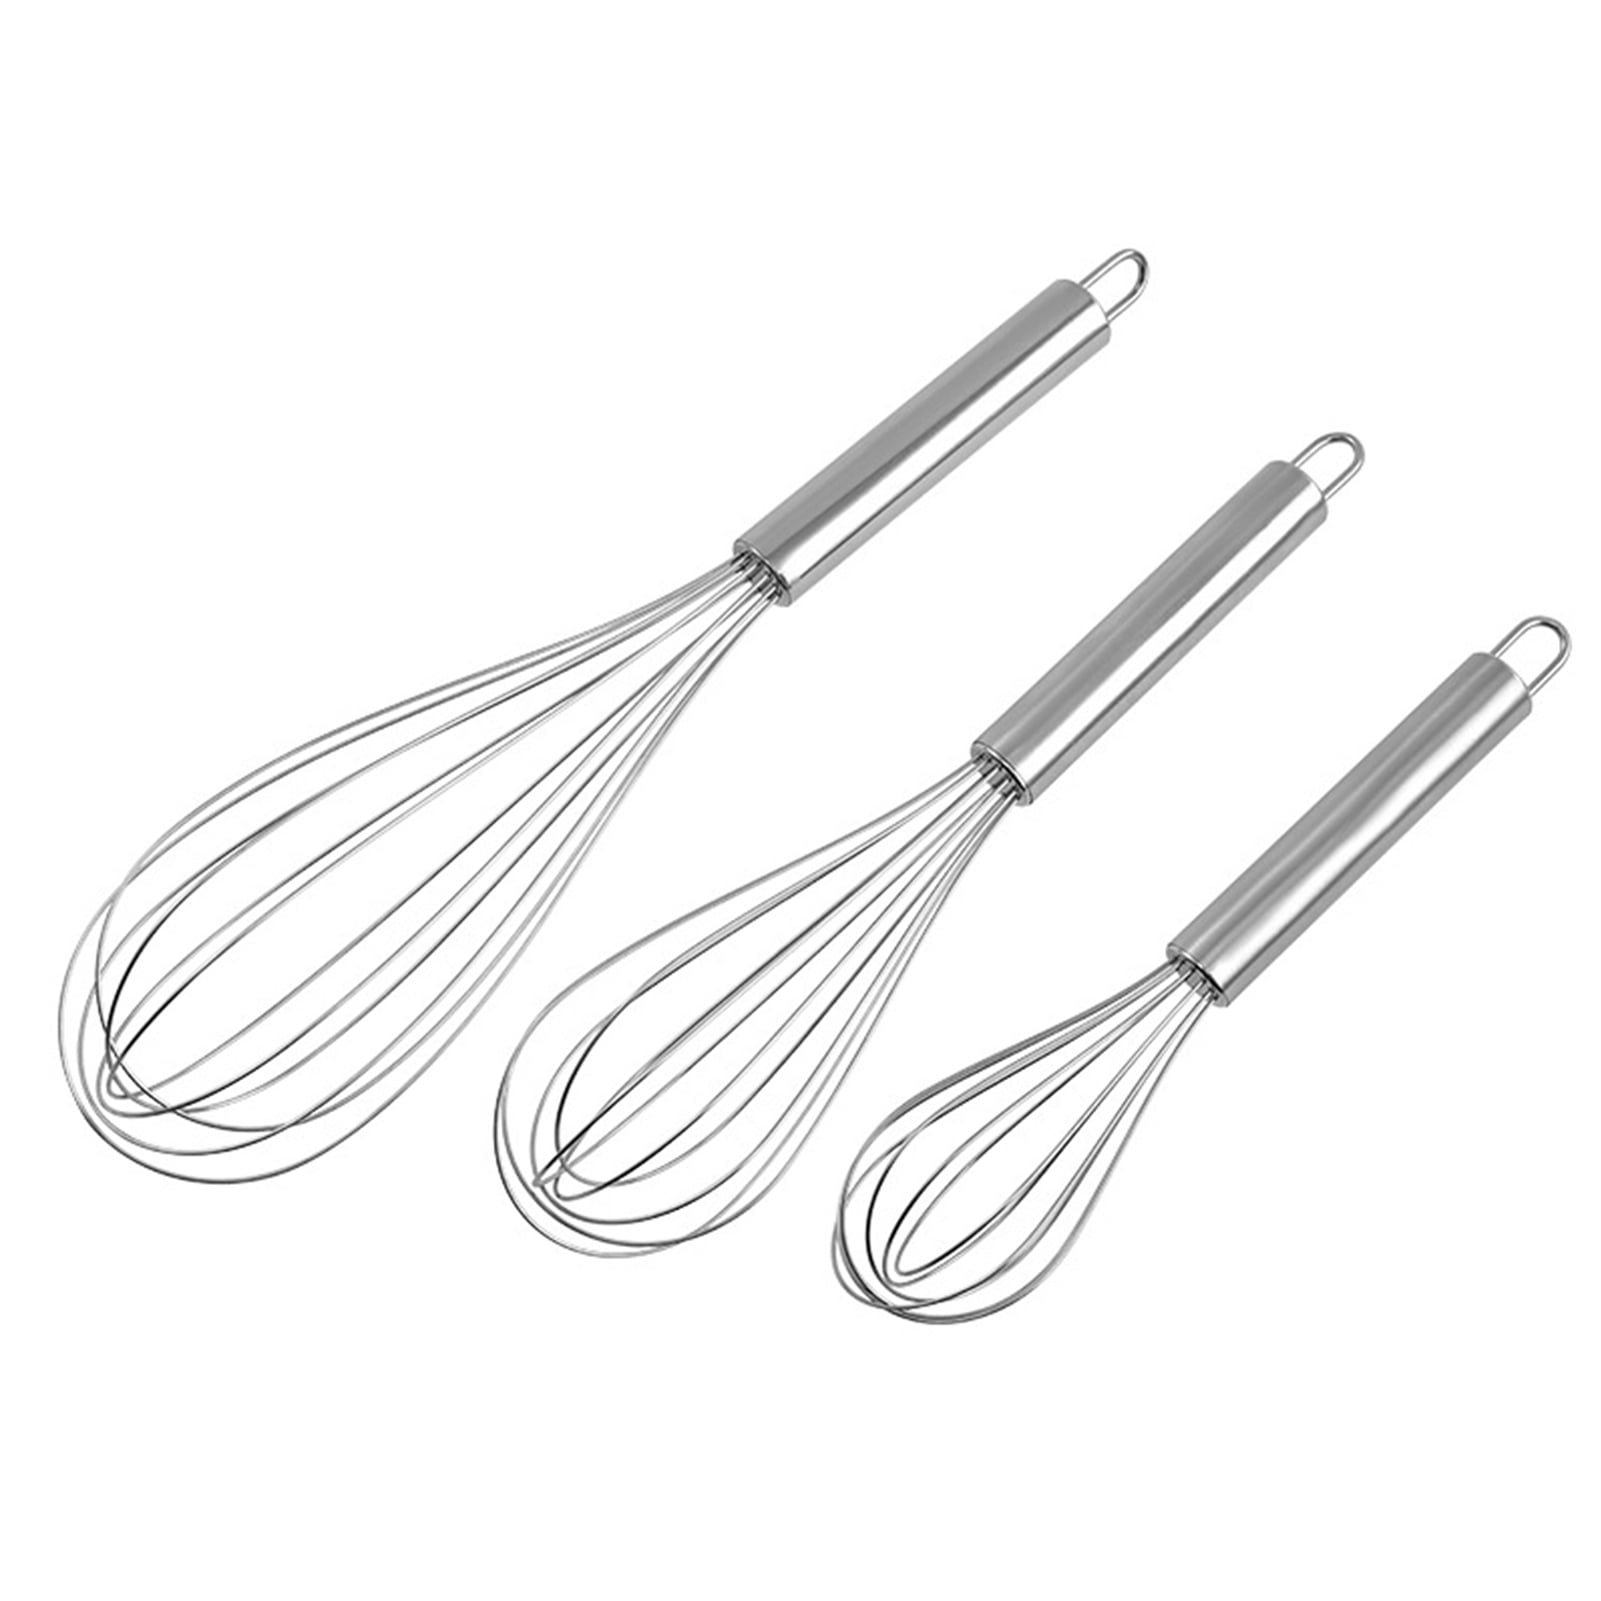 Ouddy Stainless Steel Whisk Set 8+10+12, Kitchen Whisk Balloon Whisks  for Cooking Egg Beater Wire Wisk Wisking Tool for Blending Whisking Beating  Stirring Ba…